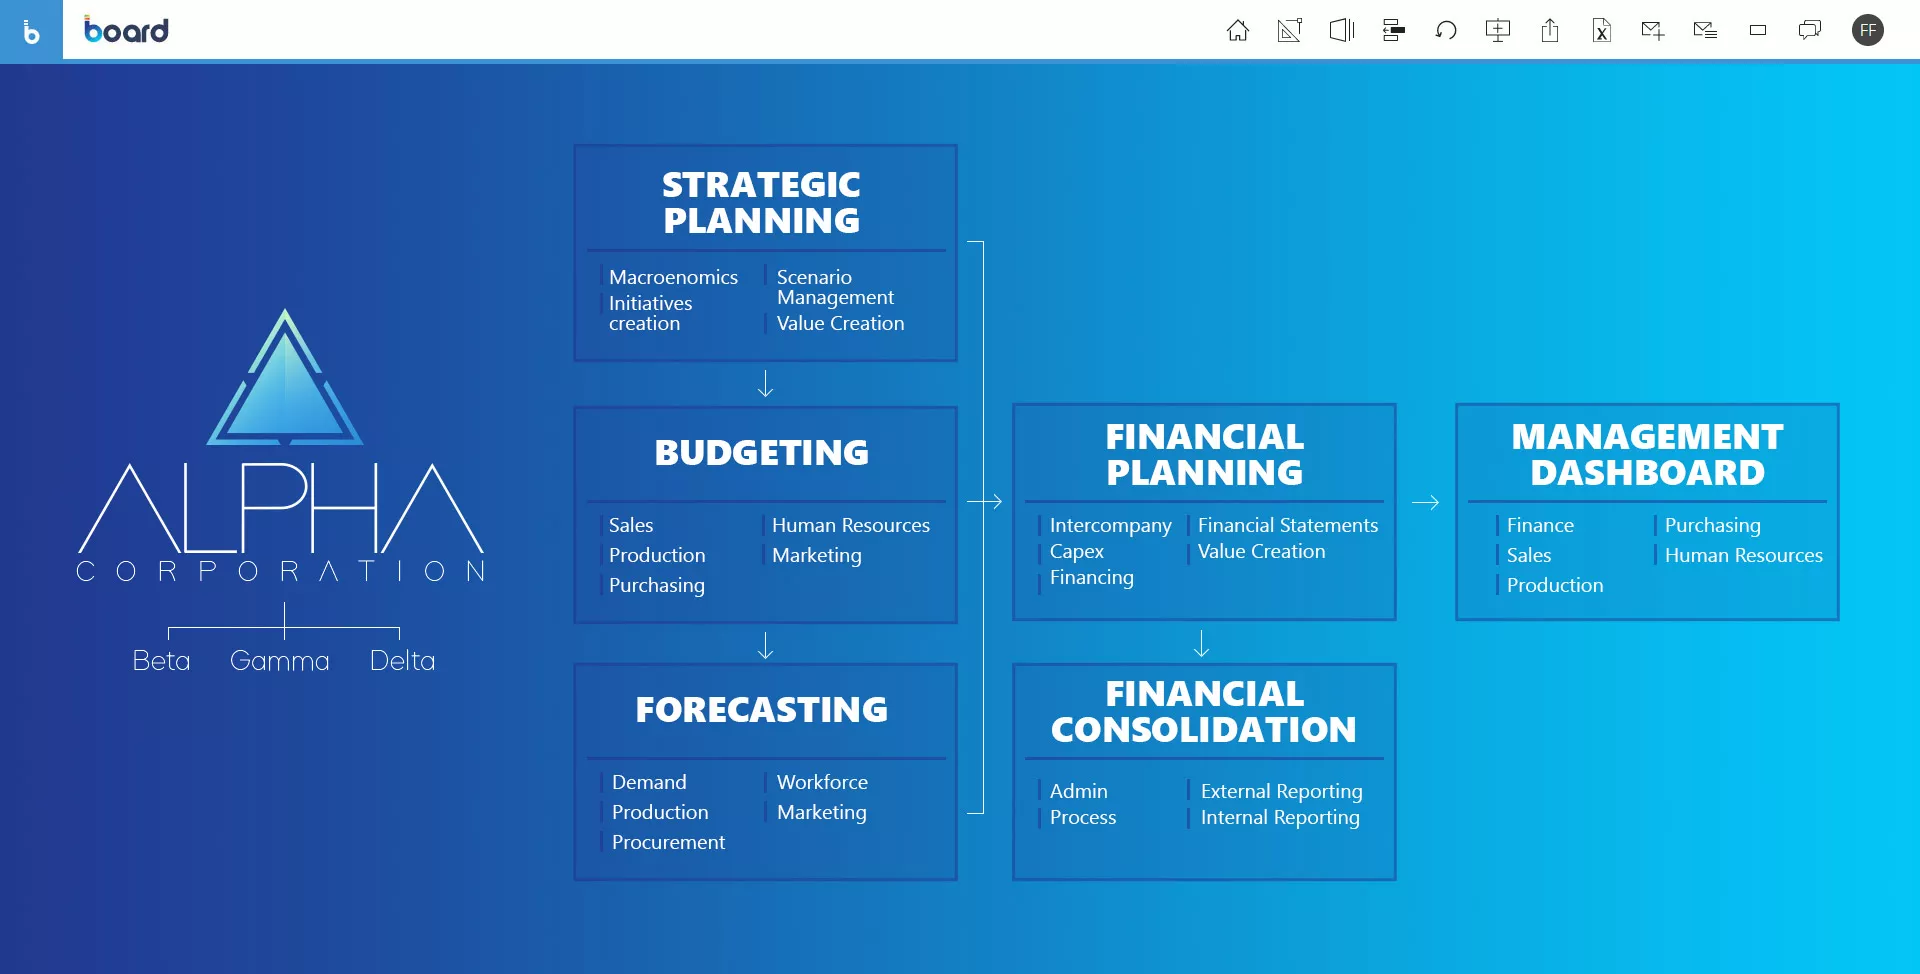 Integrated Business Planning for finance: Board&#039;s software&#039;s homepage screen